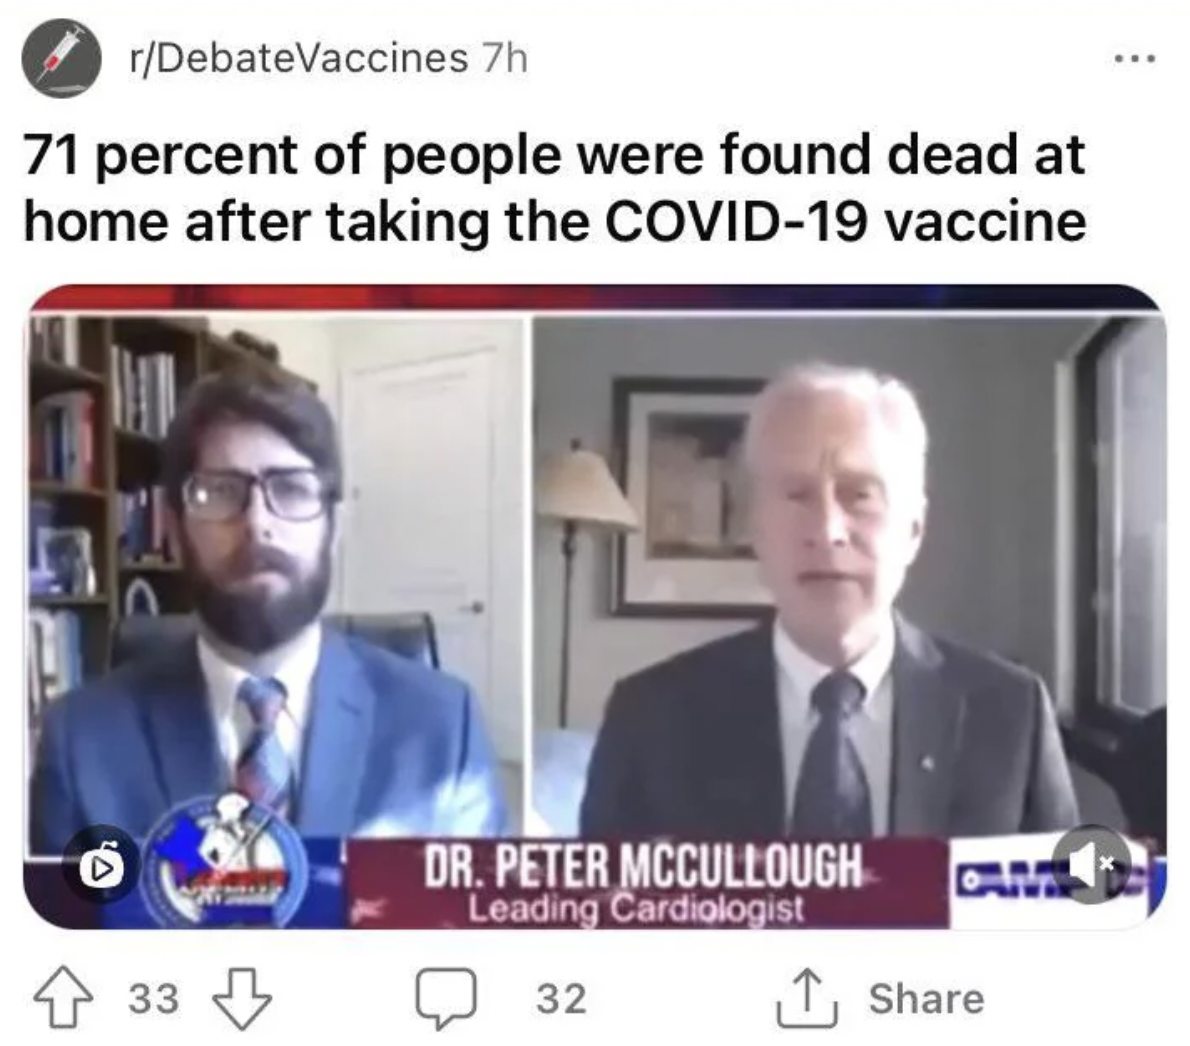 photo caption - rDebateVaccines 7h 71 percent of people were found dead at home after taking the Covid19 vaccine 33 Dr. Peter Mccullough Leading Cardiologist 32